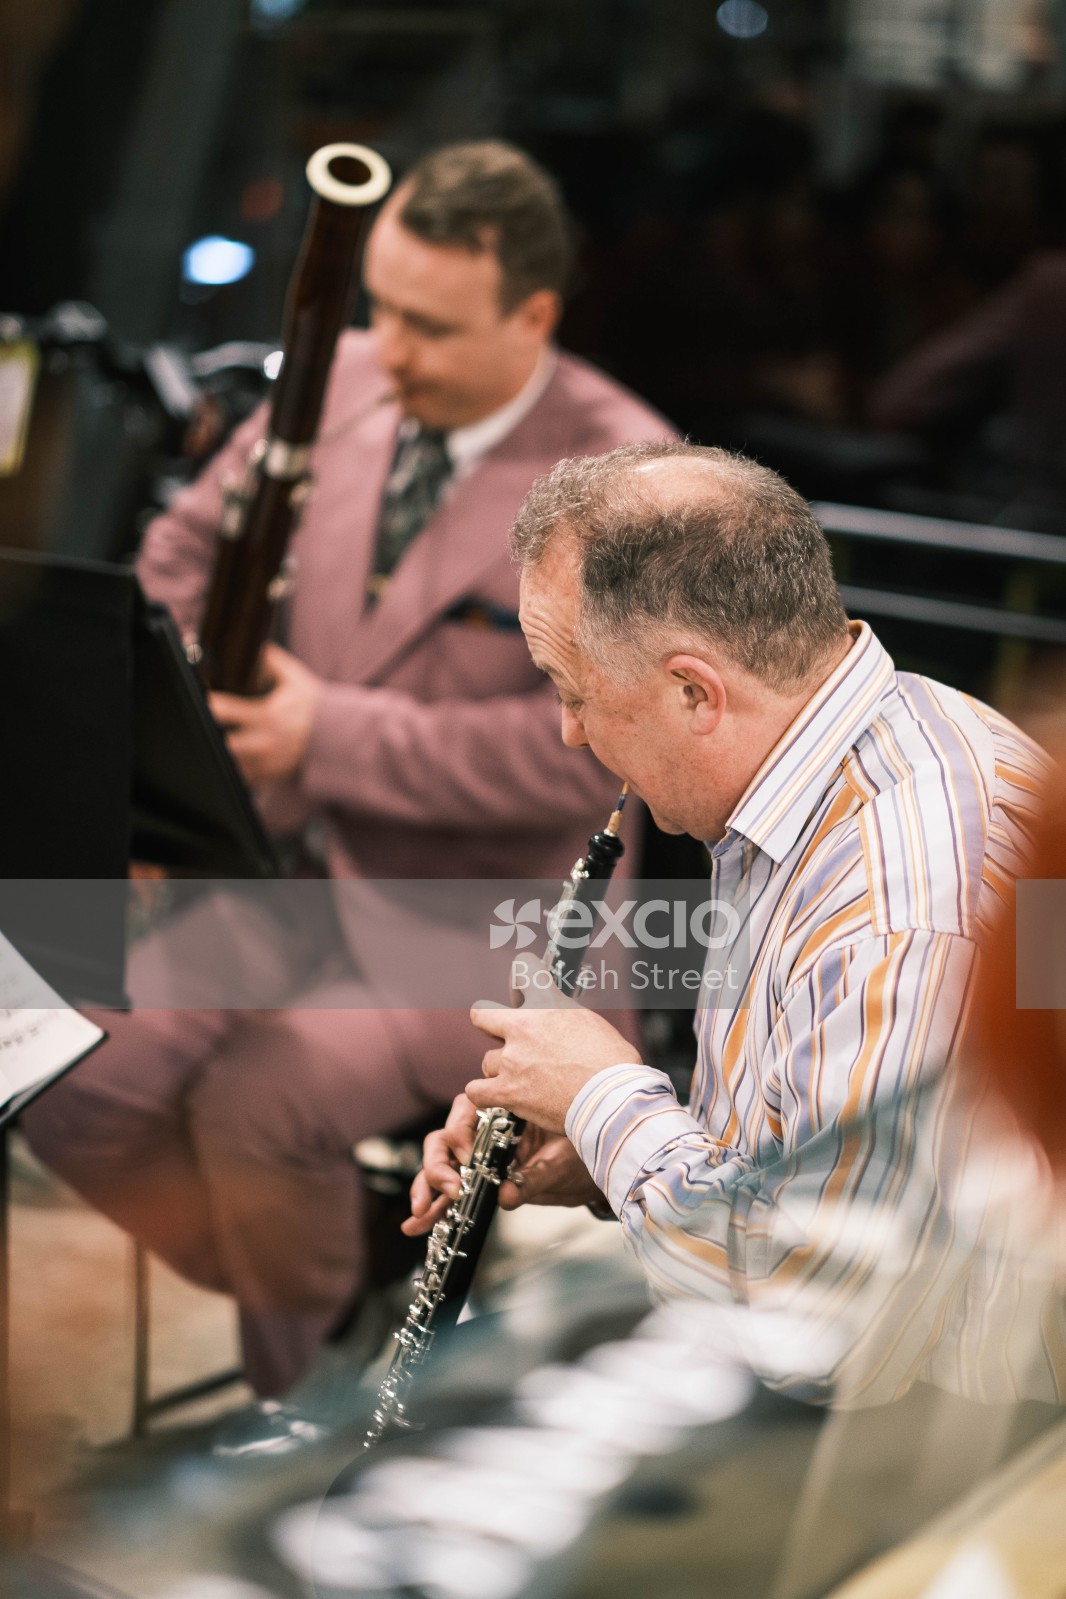 People playing clarinet and bassoon at a concert in striped shirt and pink suit